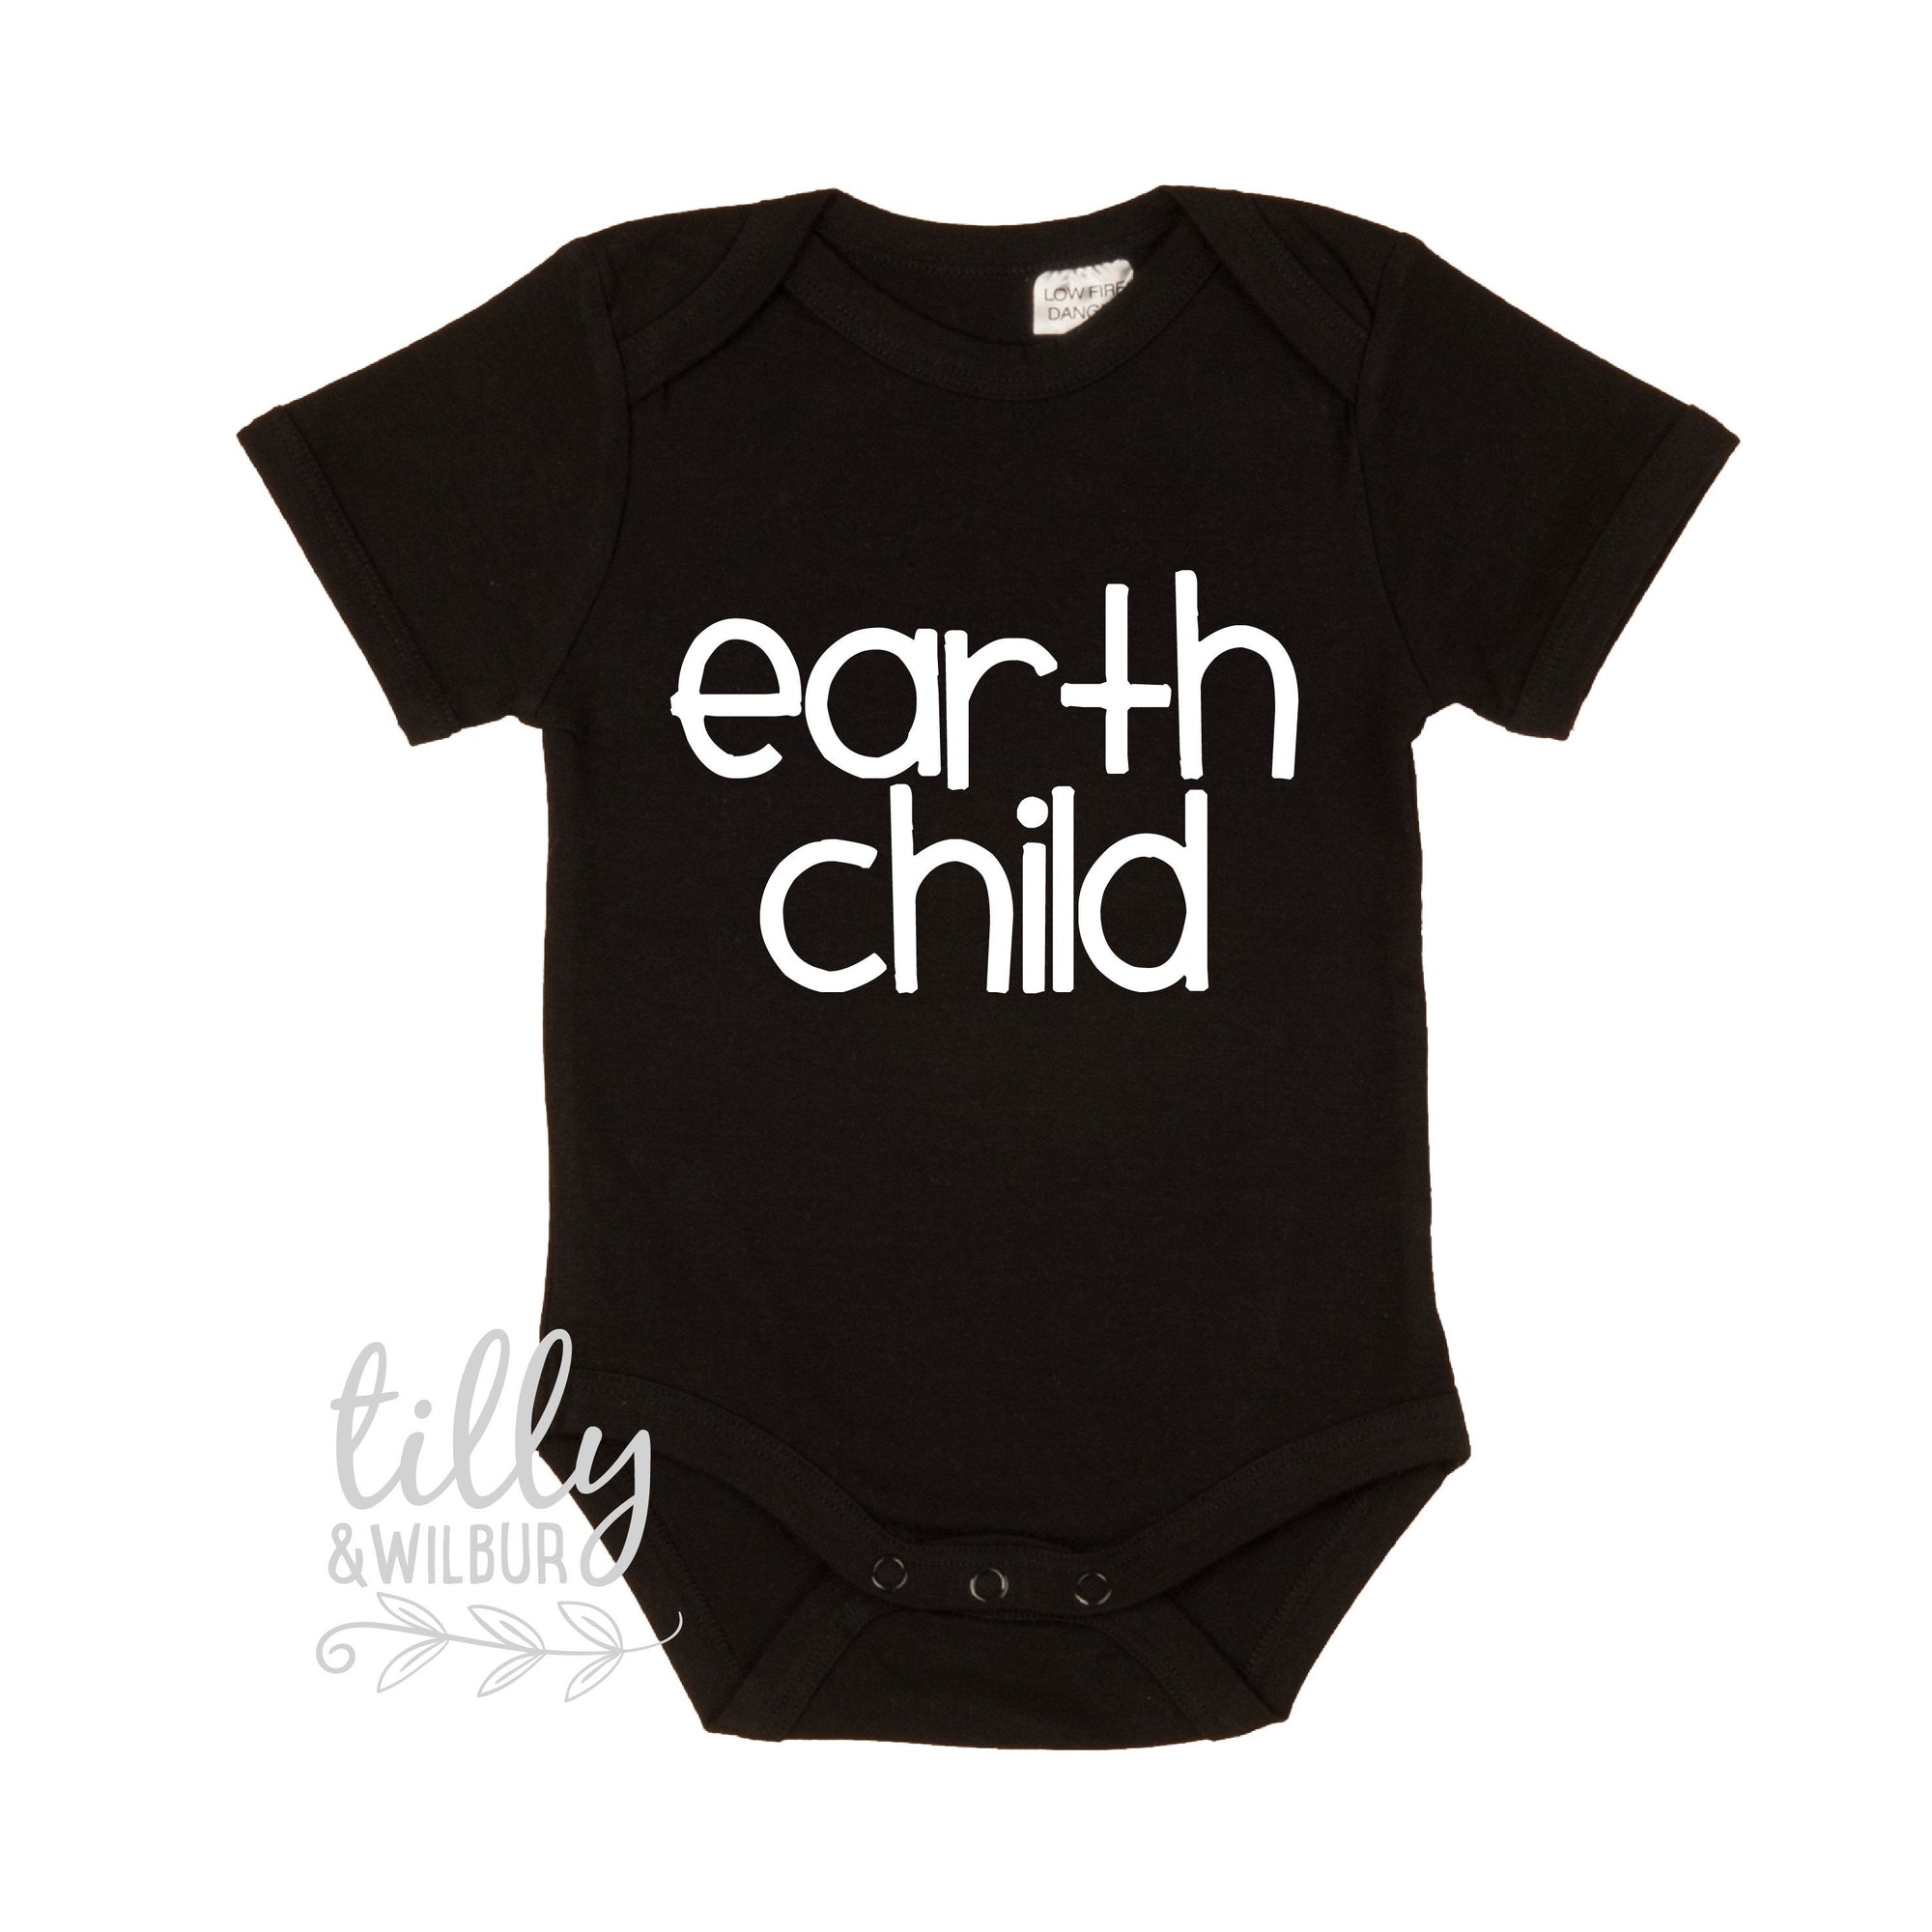 Earth Child Baby Bodysuit, Unisex Earth Child Bodysuit, Earthchild Baby Outfit, Environment, Kindness, Love, Equality, Save The Planet,